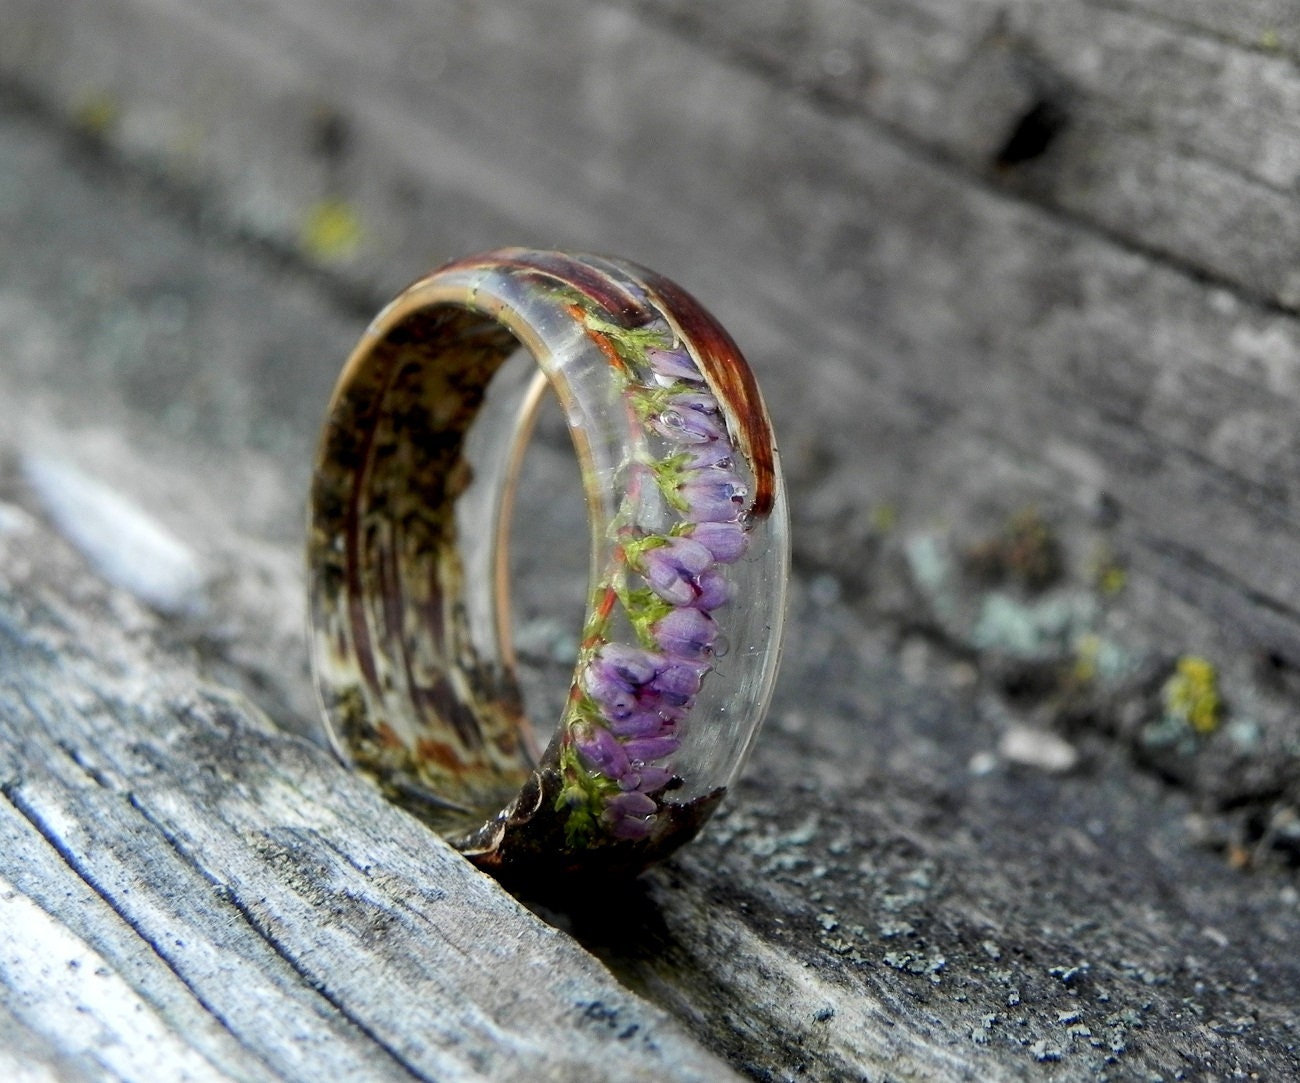 Crystal Resin Cremation Jewelry Rings Collection - Ashes in Glass